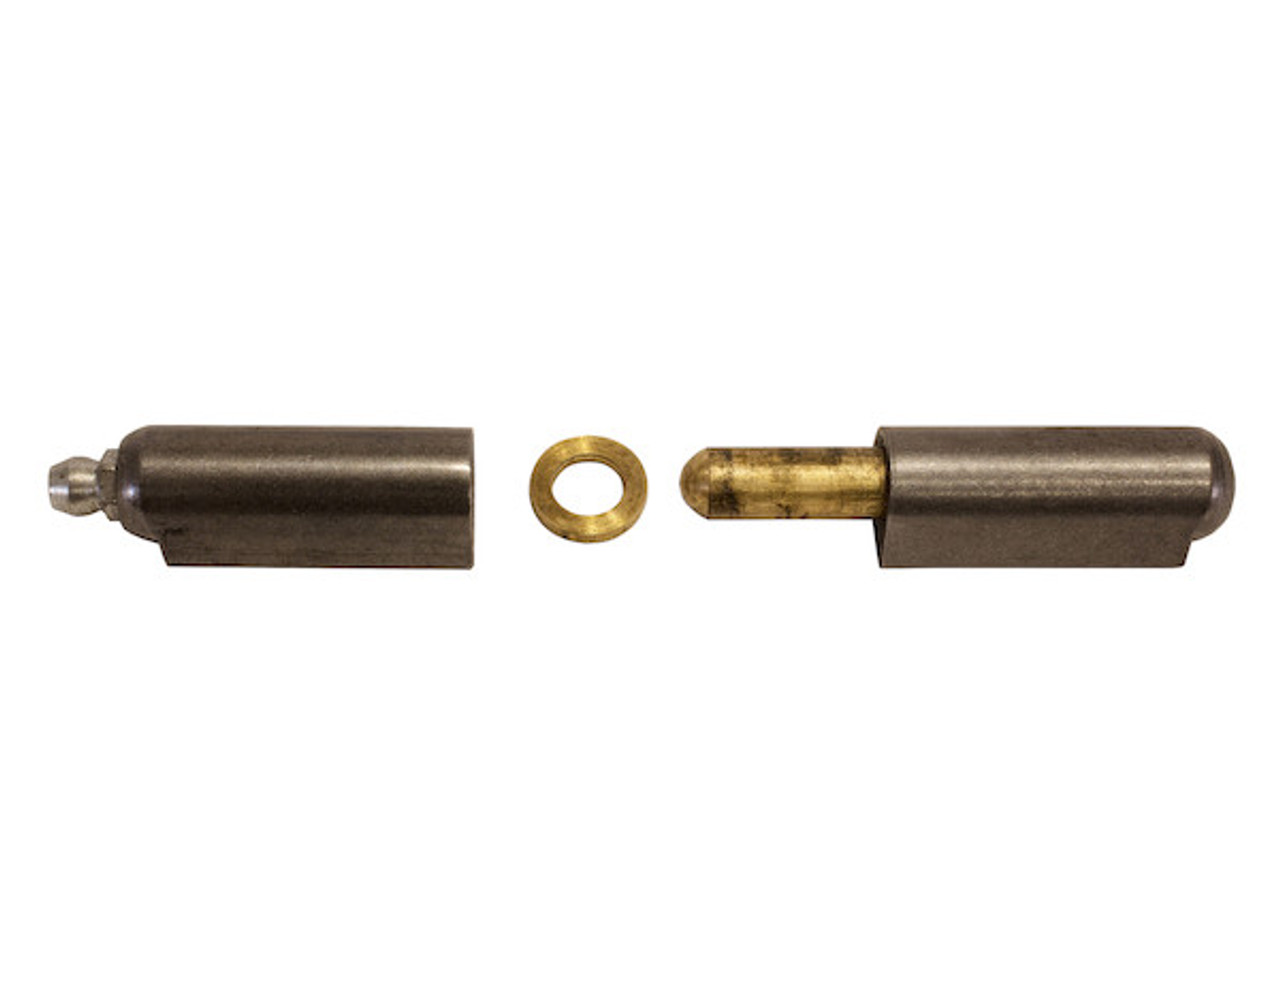 FBP100GF - Steel Weld-On Bullet Hinge with Brass Pin/Bushing/Grease Fitting .77 x 3.94 Inch